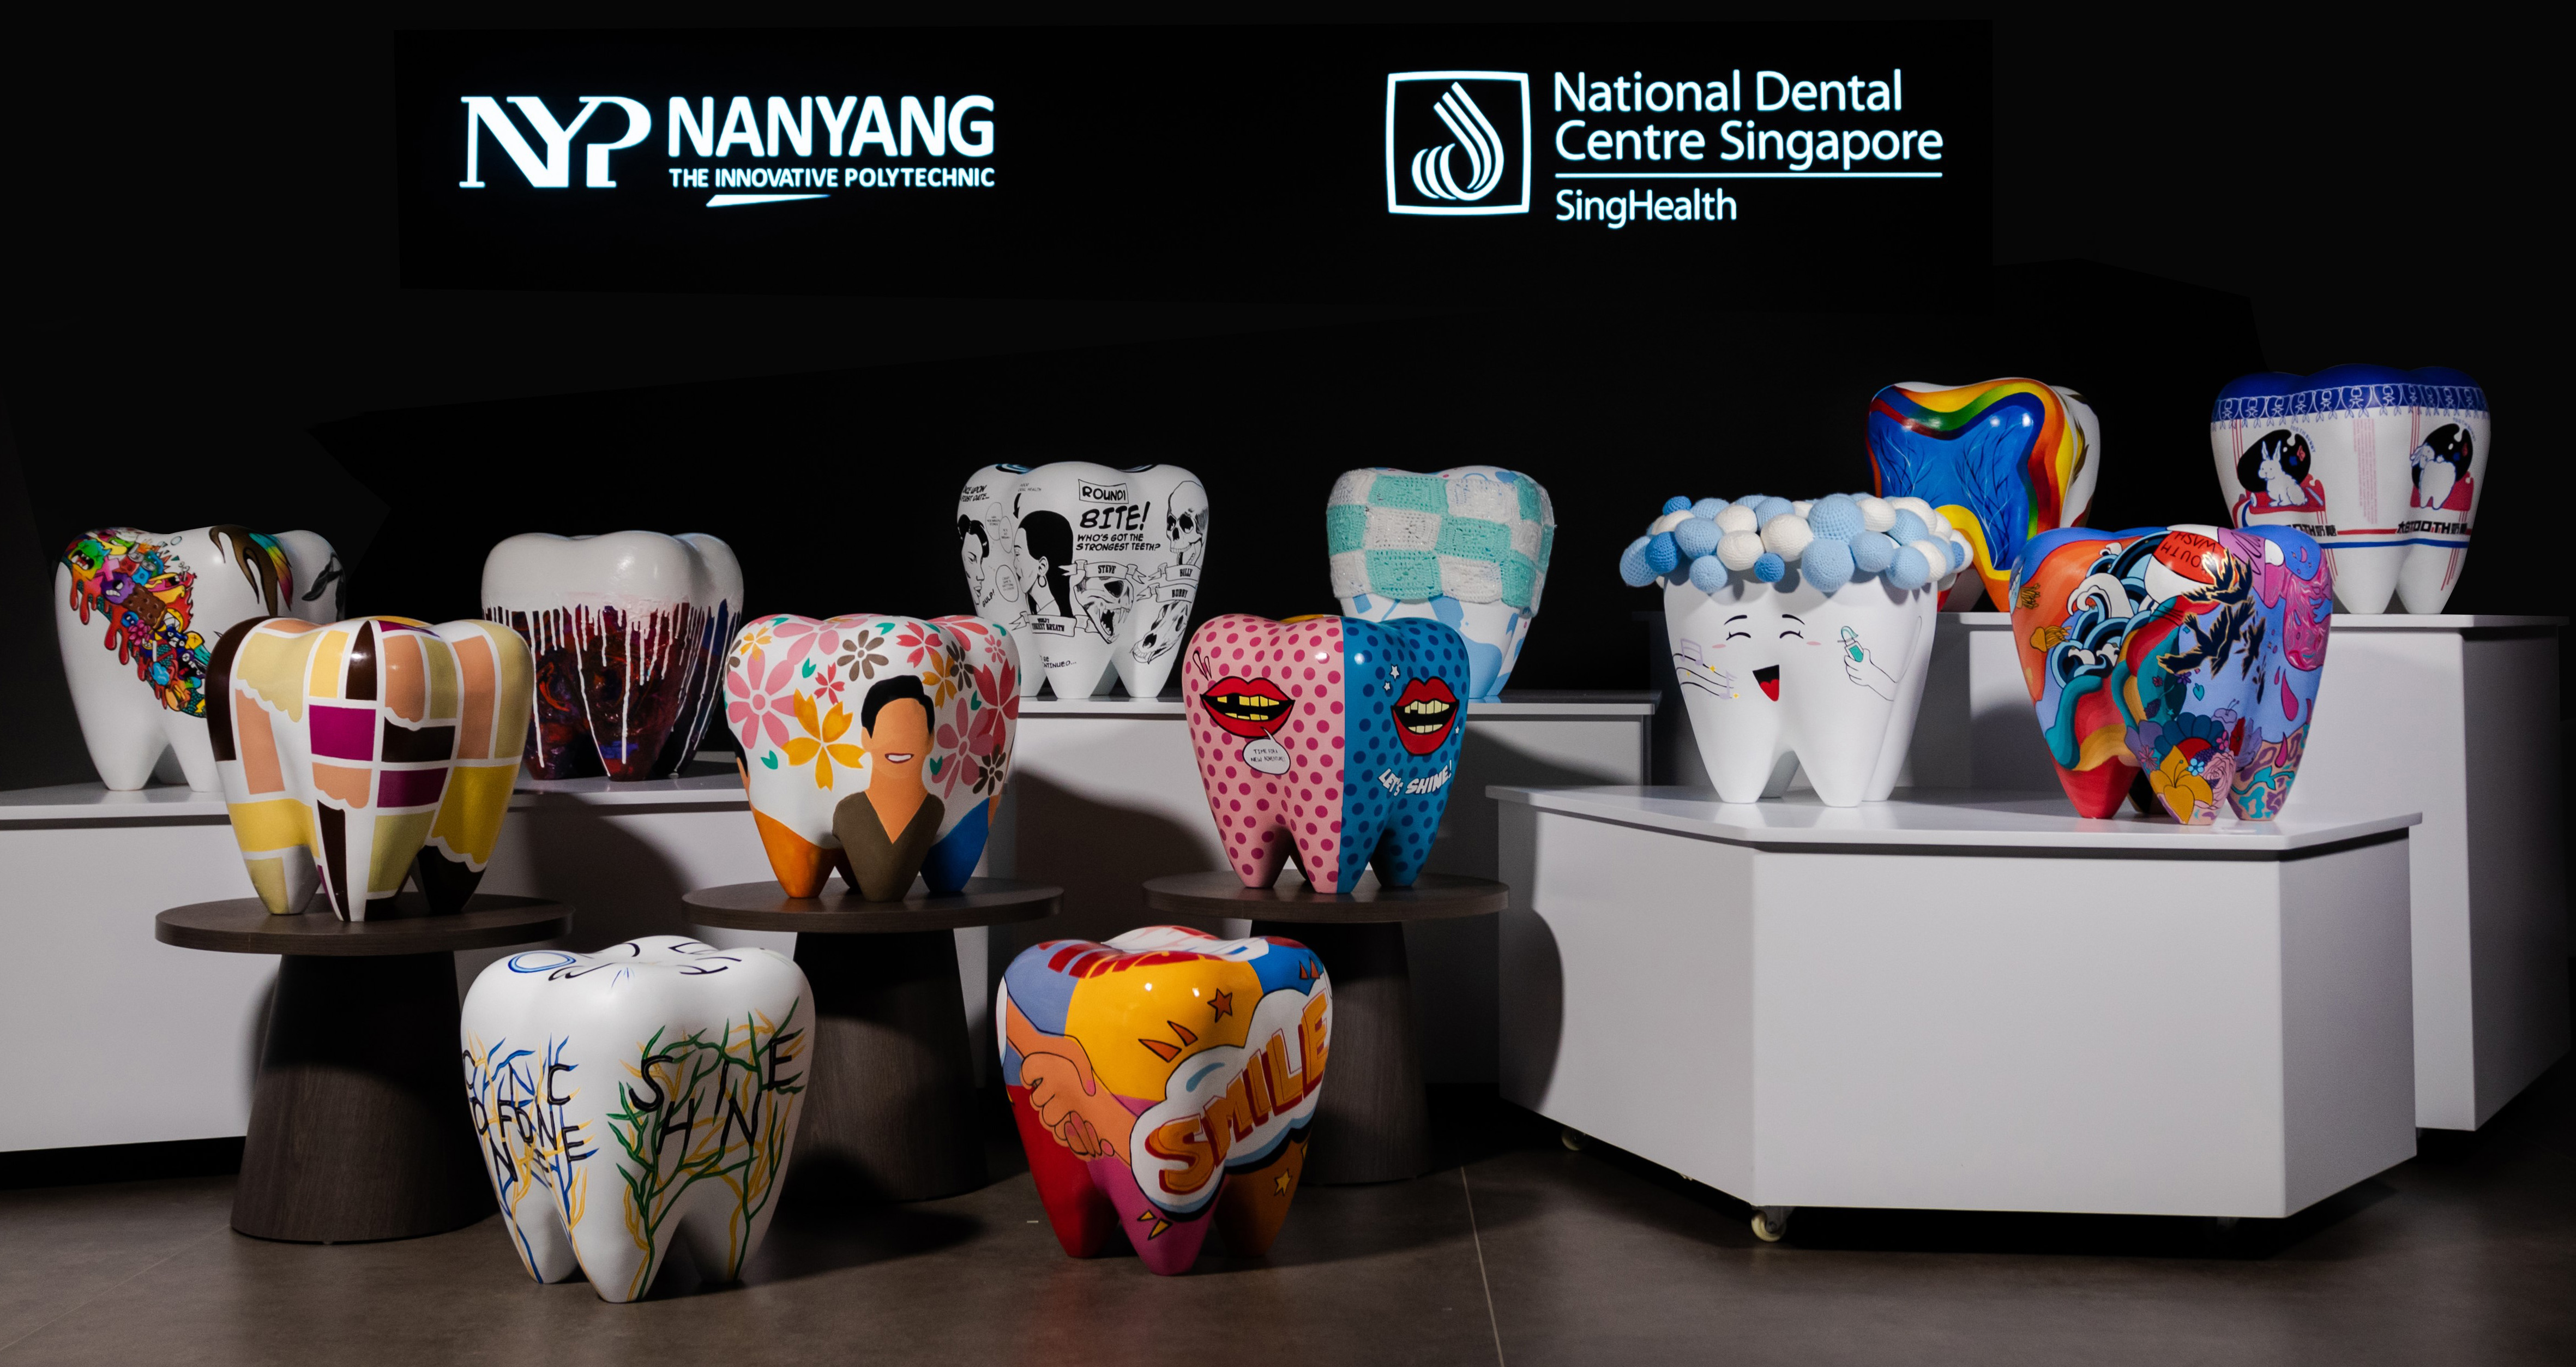 Hand-painted stools for a cause – A collaboration between National Dental Centre Singapore and Nanyang Polytechnic